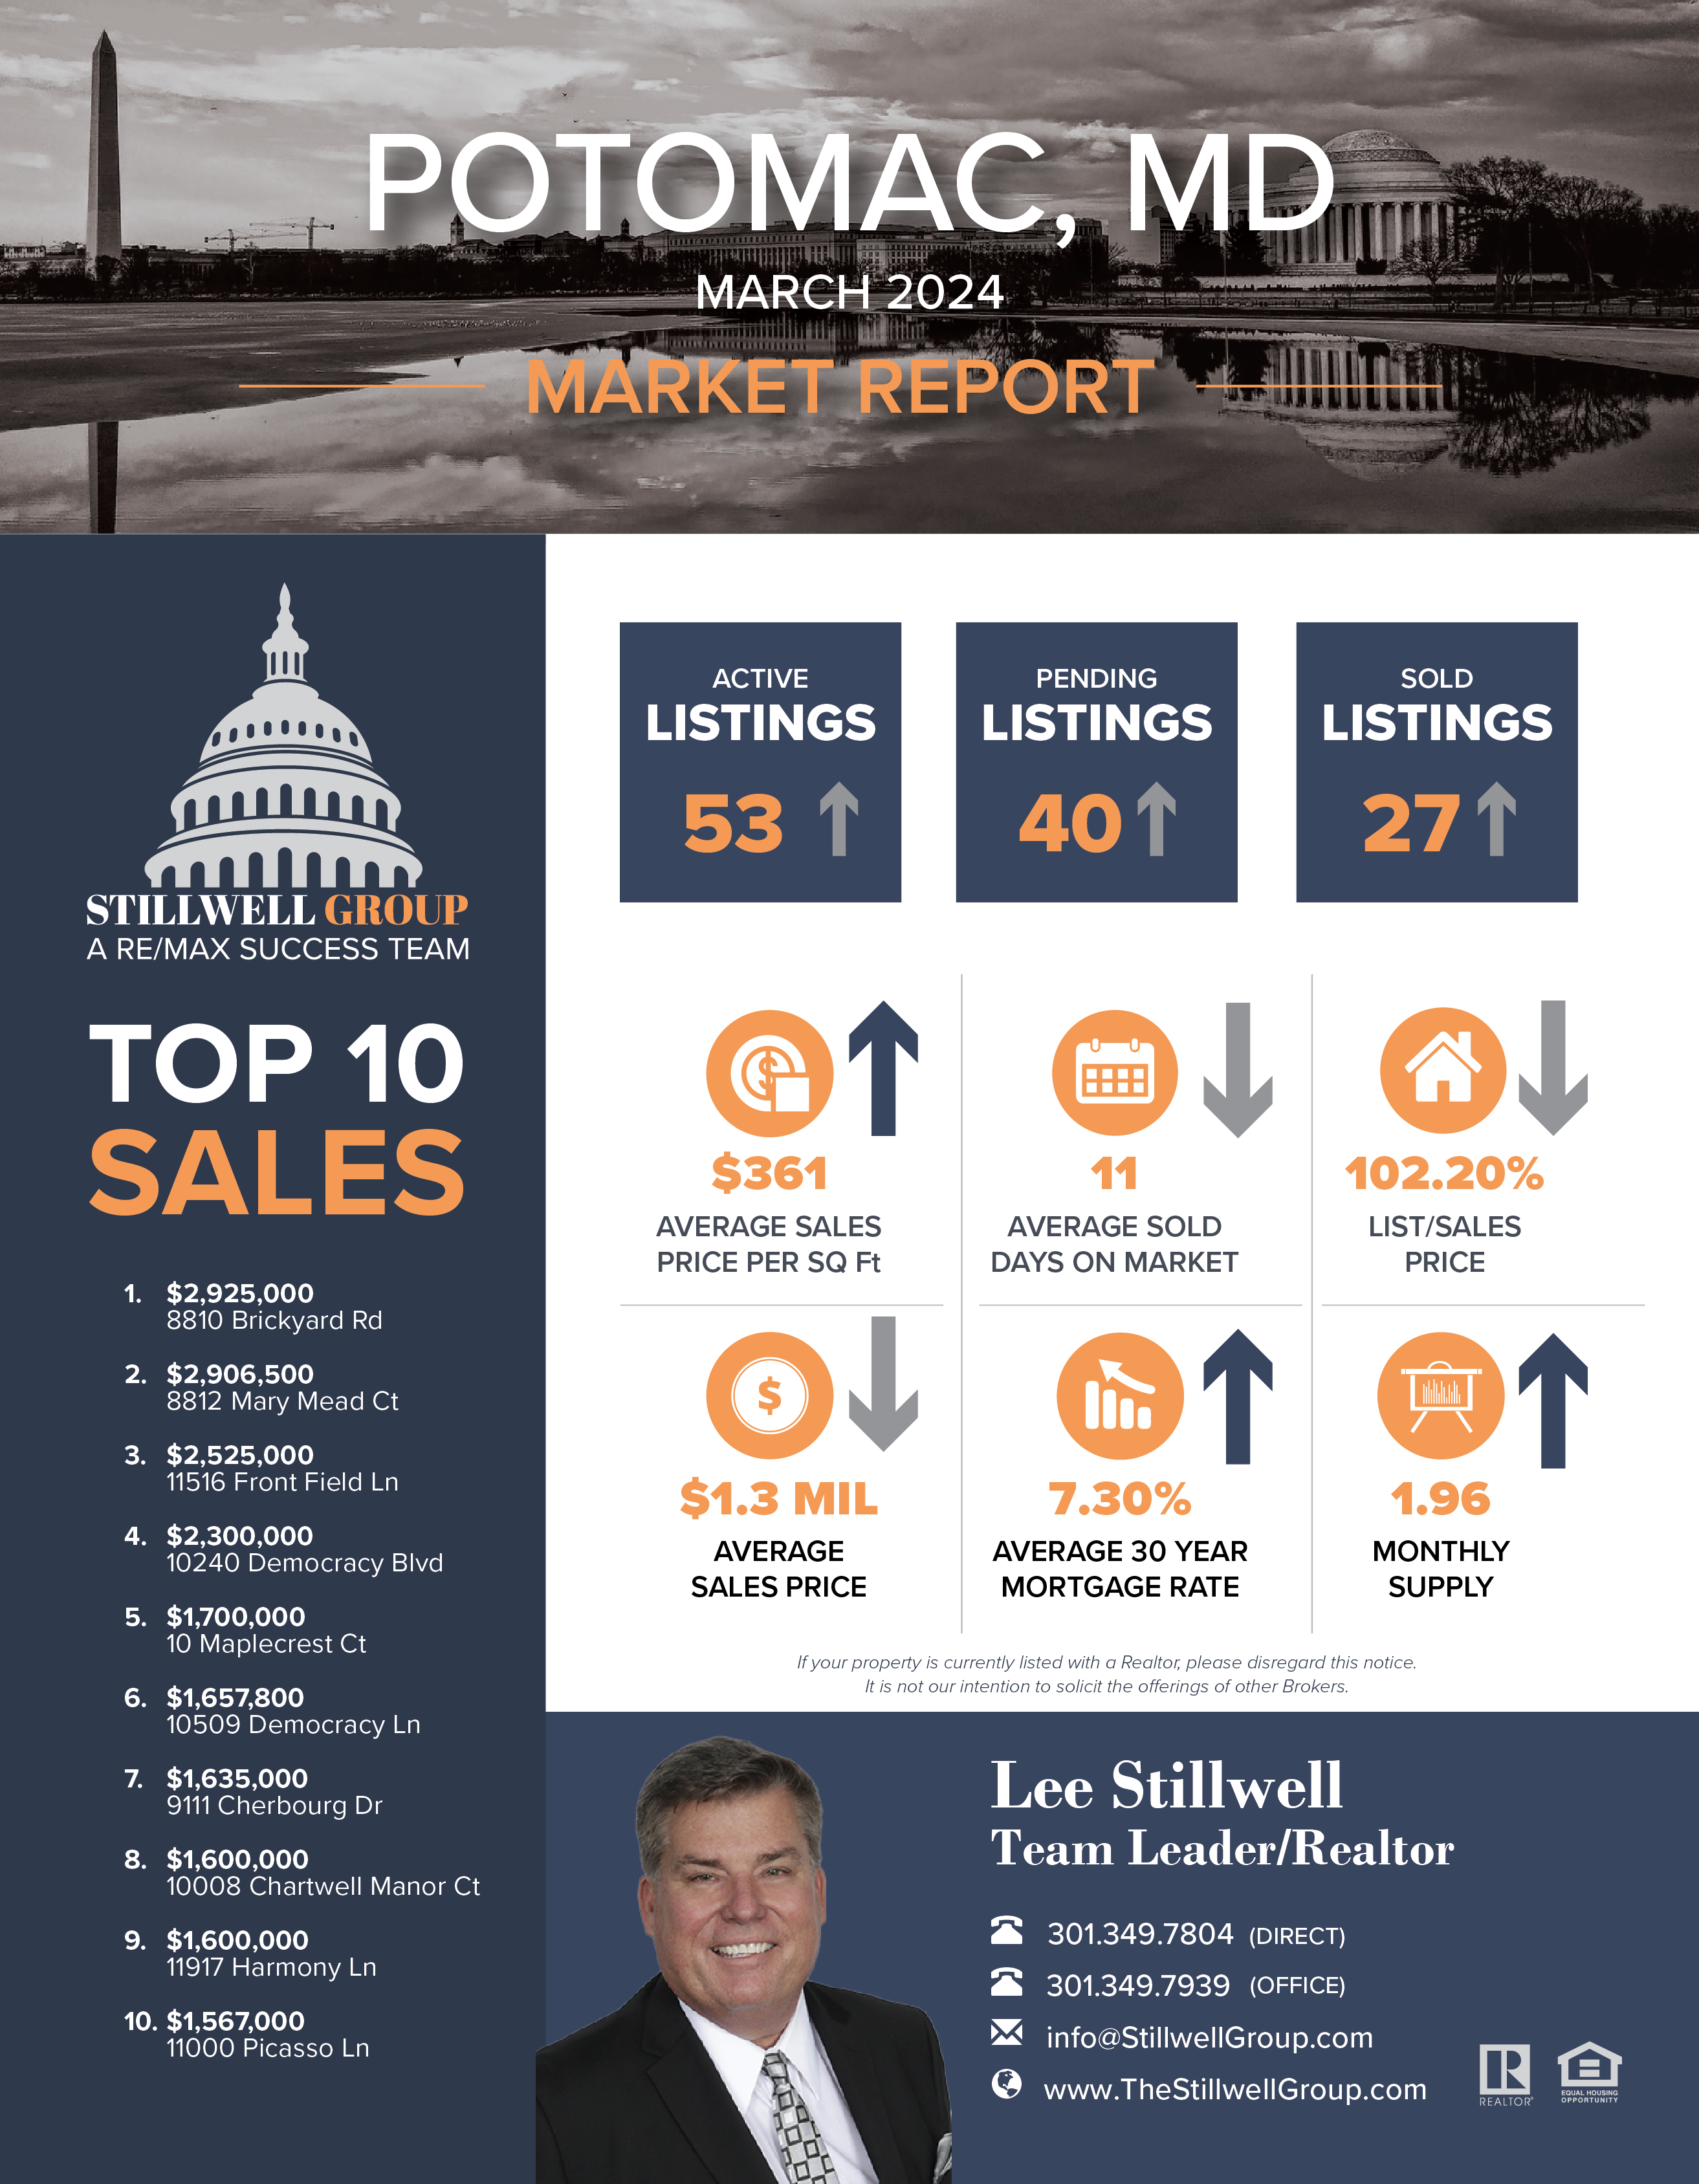 Potomac, MD March 2024 Market report